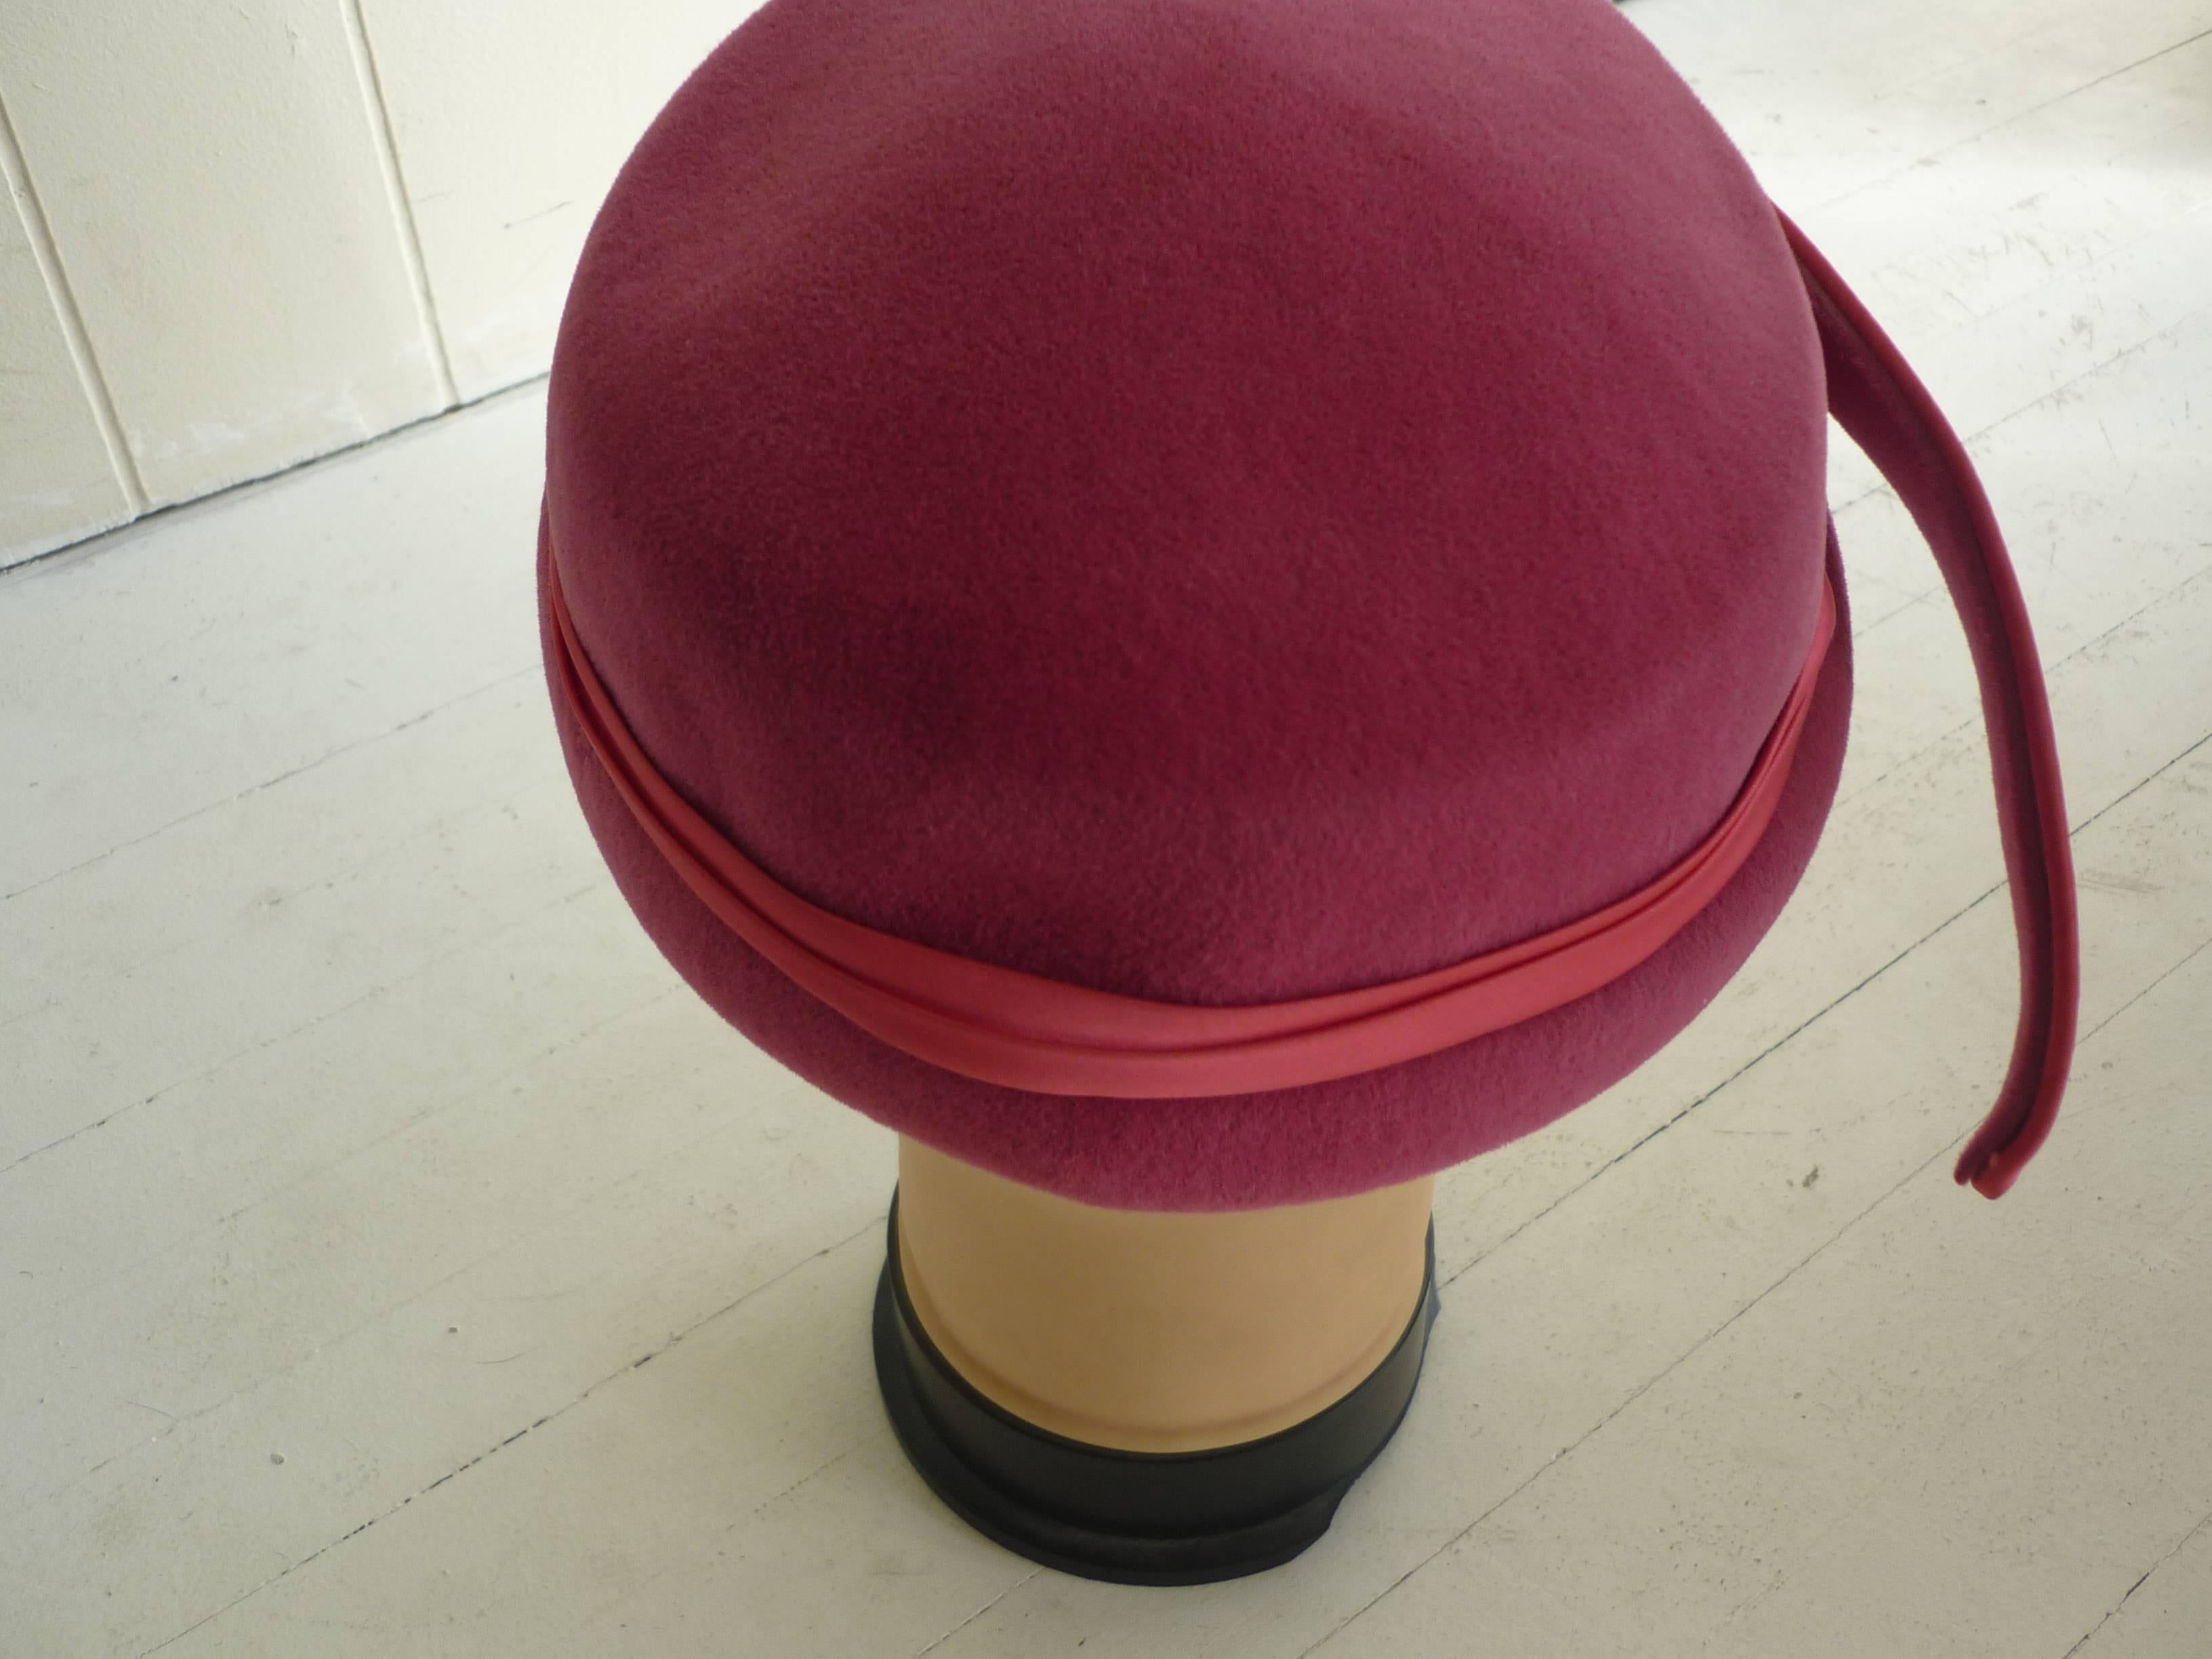 Made of felt, trimmed with satin, with a featherlike adornment, this hat fits snugly on your head.

The underside of the hat has a serpentine silver and gros grain trim.

The hat was made in Italy.